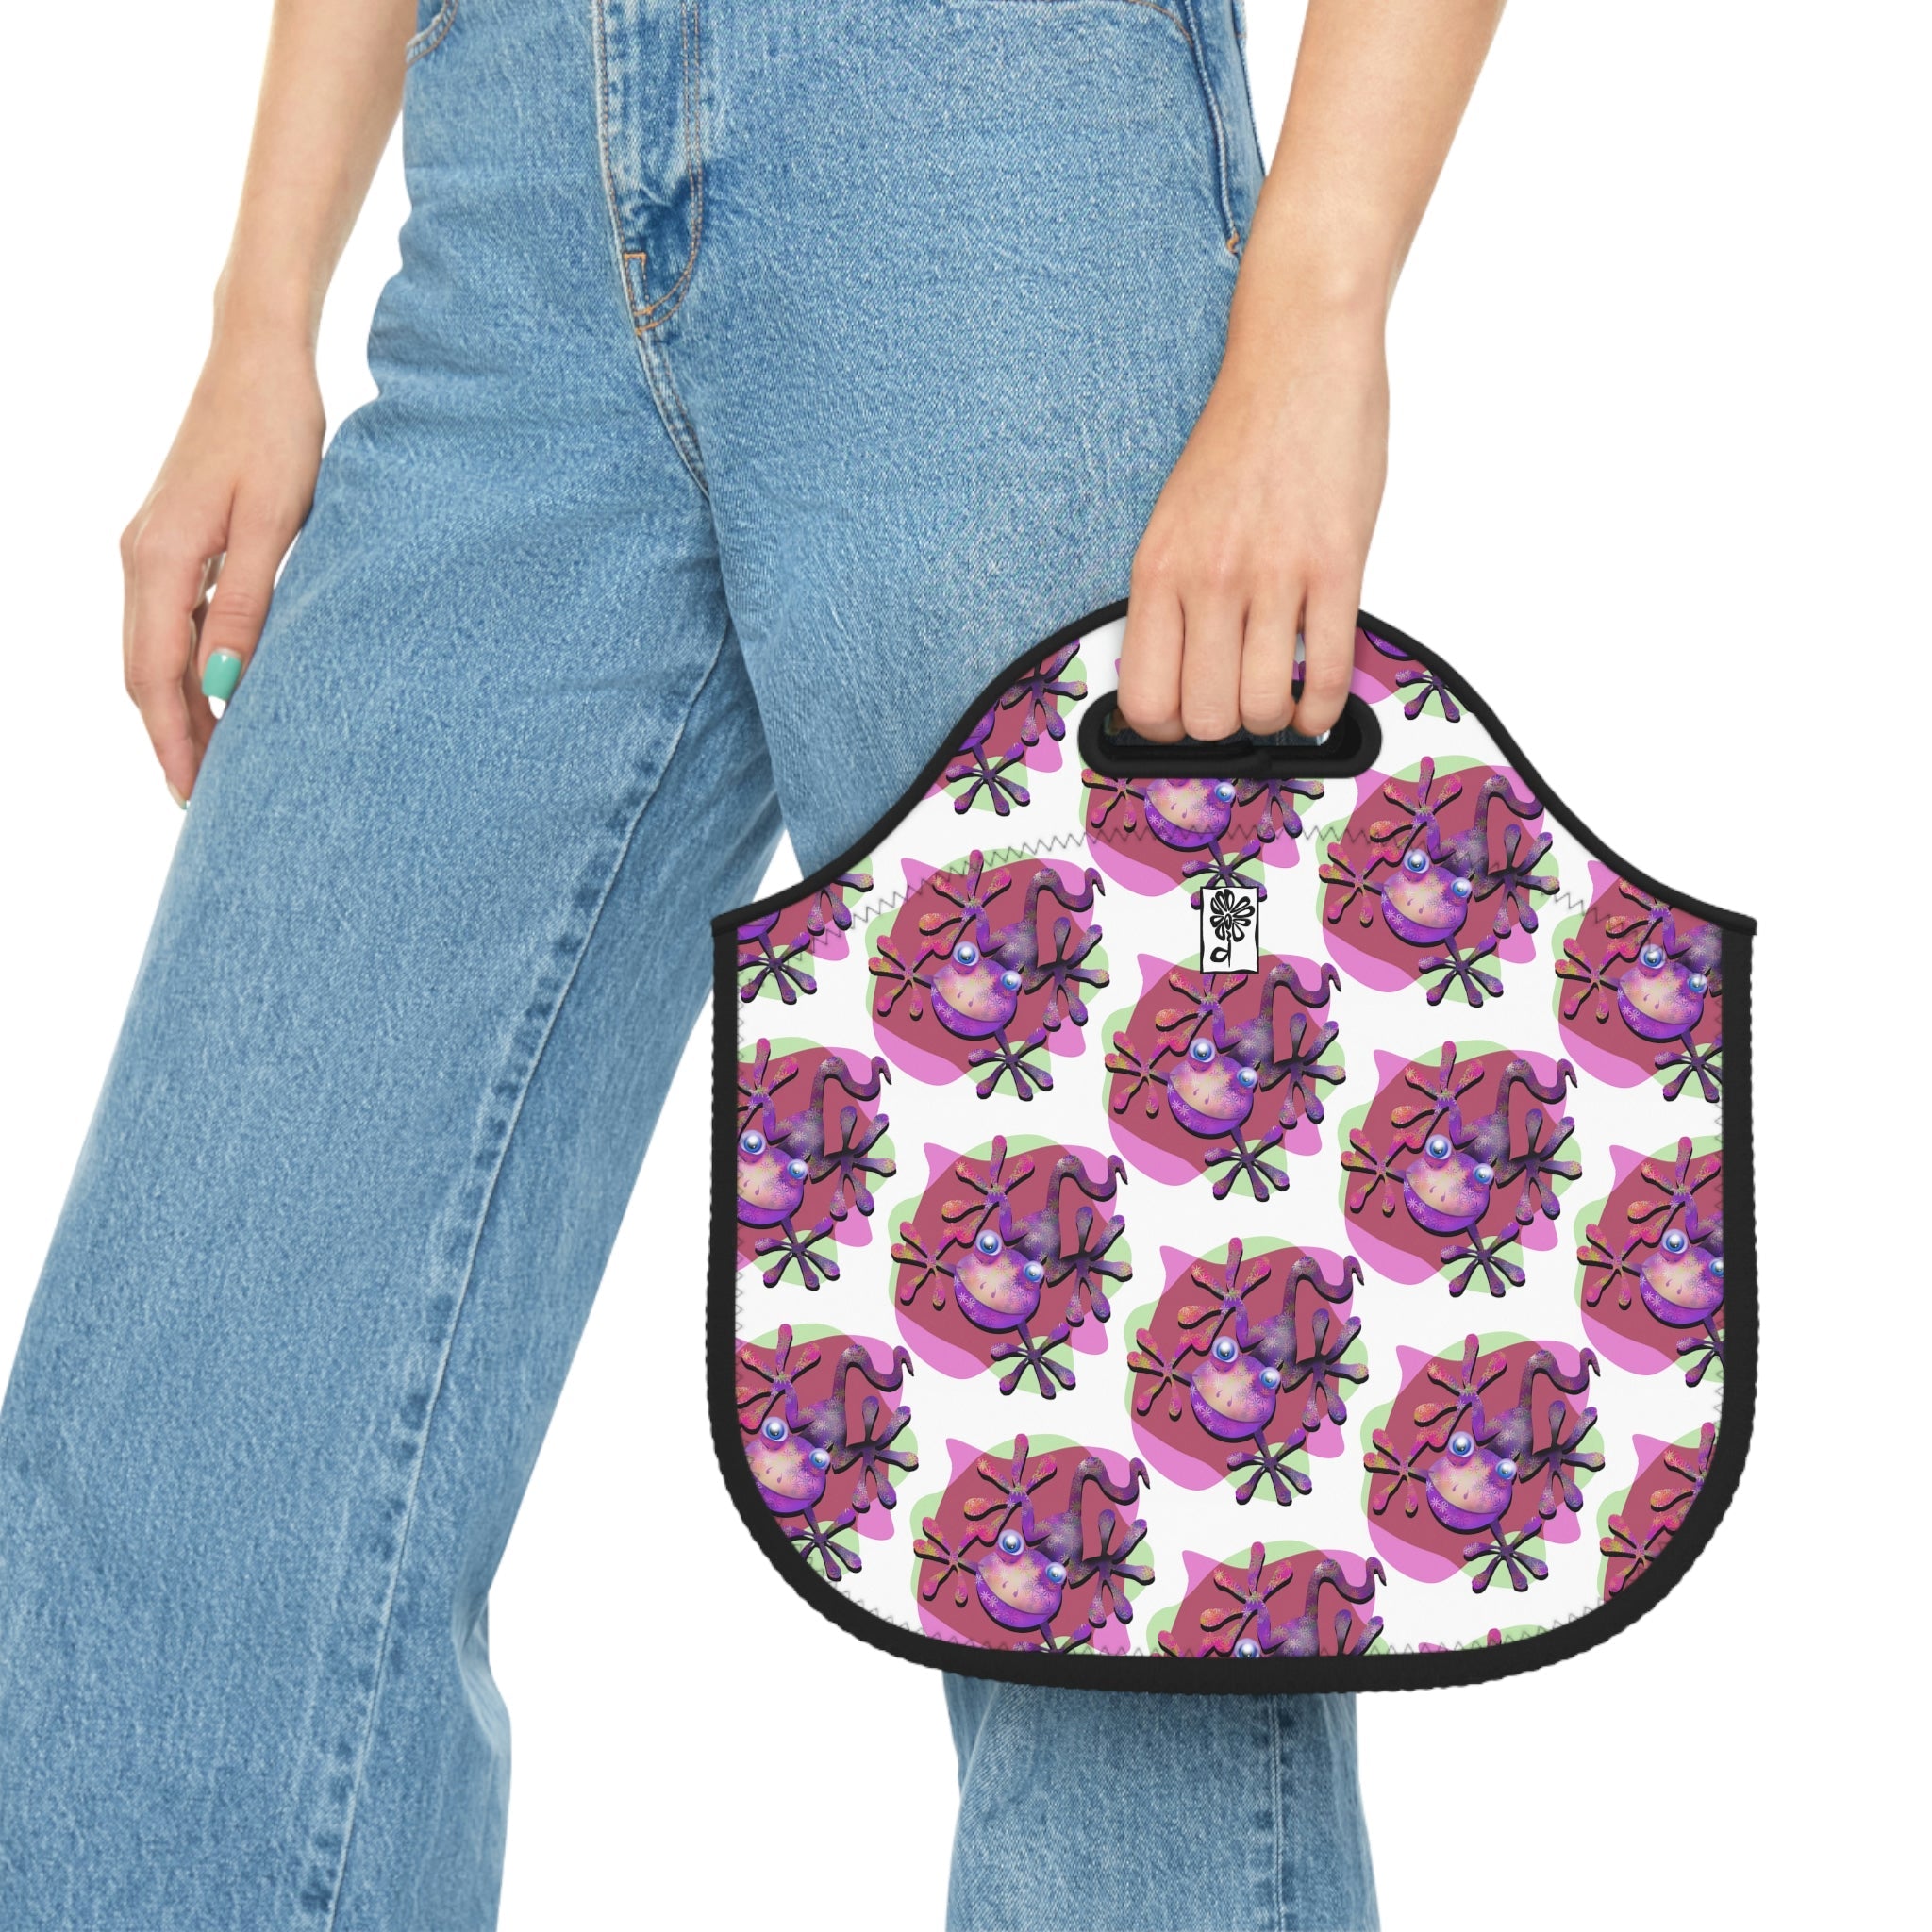 Denim Lunch Bag with Pink Flowers Design